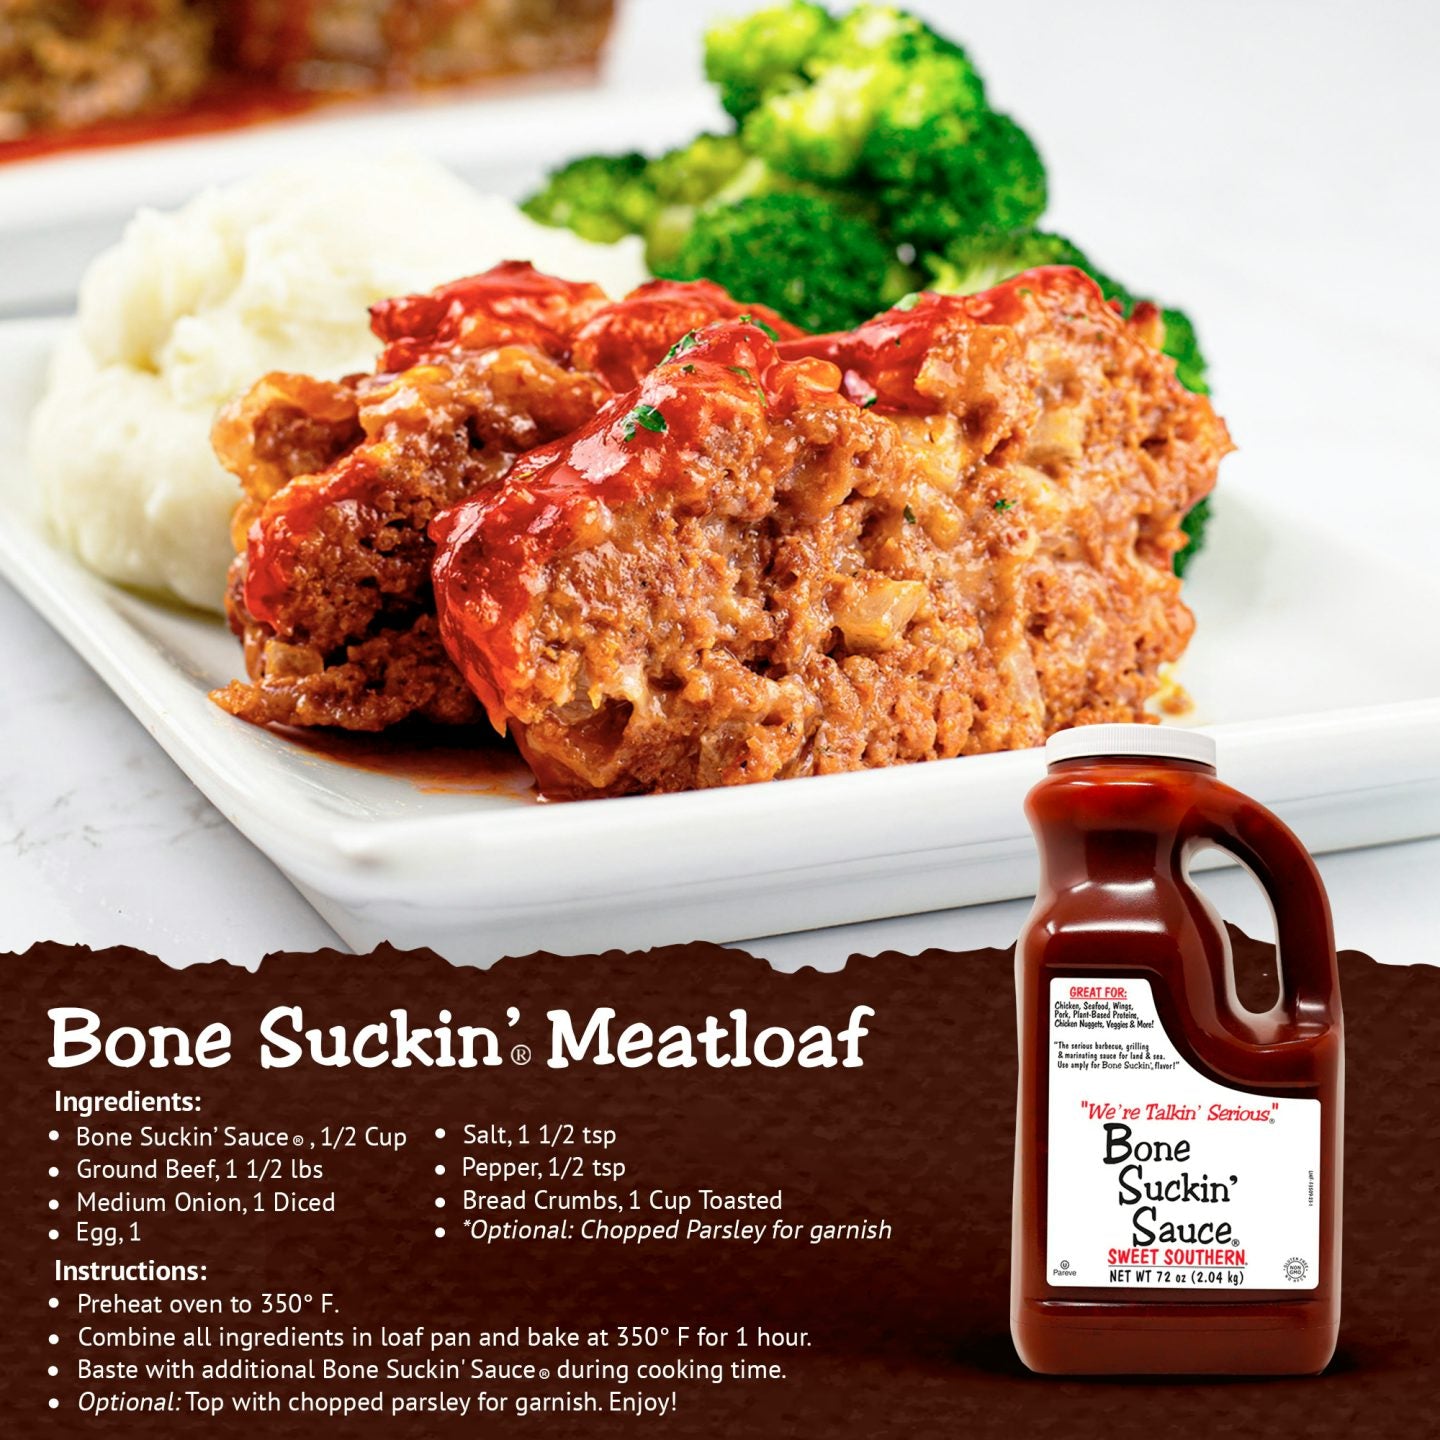 Bone Suckin' Meatloaf Recipe. Ingredients: Bone Suckin' Sauce, 1/2 cup, ground beef, 1 1/2 lbs, 1 diced medium onion, 1 egg, 1.5 tsp salt, 1/2 tsp pepper, 1 cup toasted bread crumbs, optional: chopped parsley for garnish. Instructions: Preheat oven to 350F. Combine all ingredients in loaf pan and bake at 350F for 1 hour. Baste with additional Bone Suckin' Sauce during cooking time. Optional: top with chopped parsley for garnish. Enjoy!